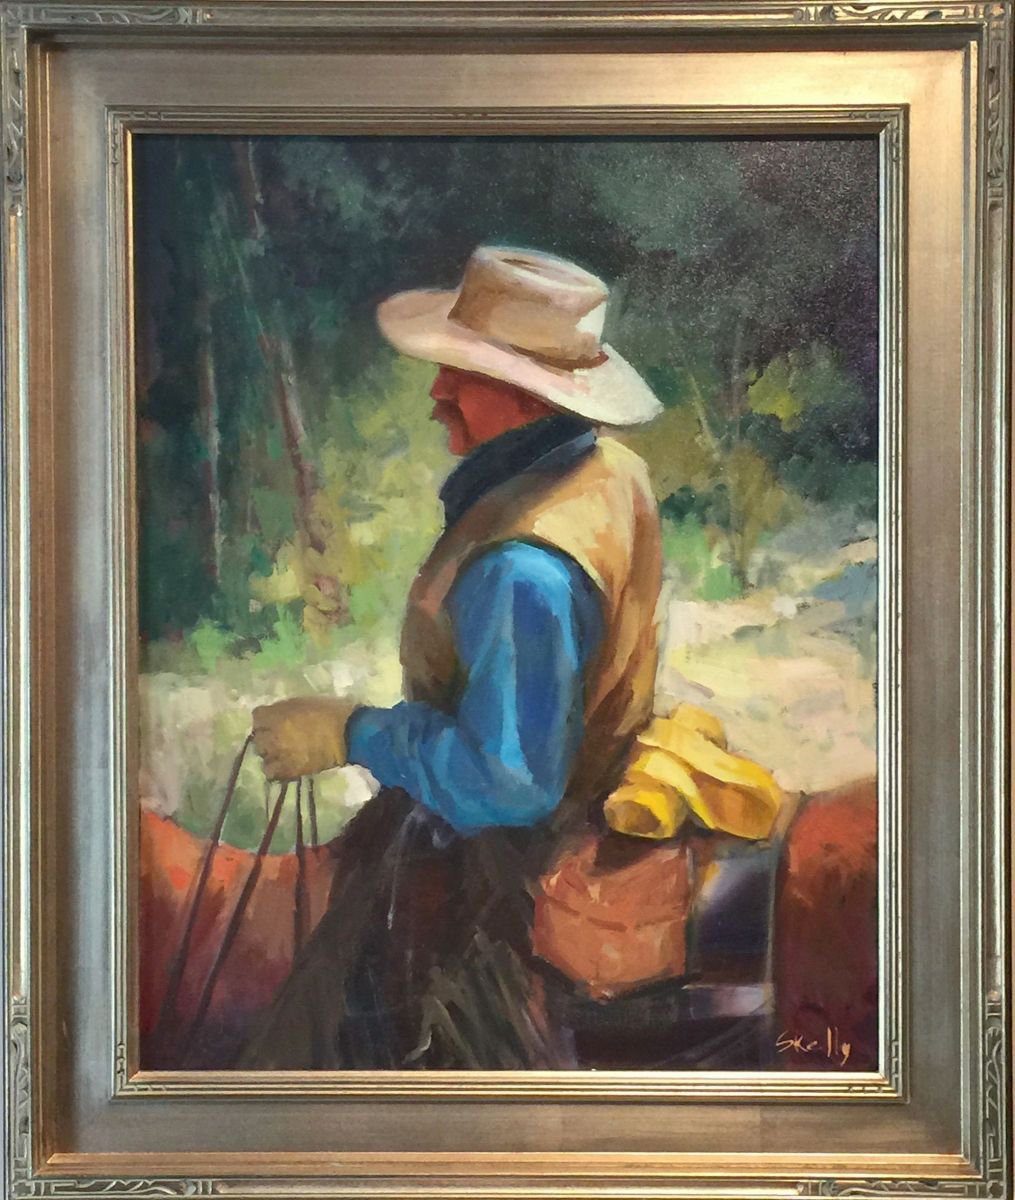 Iconic Cowboy Oil painting by Jeffrey Skelly | Artfinder